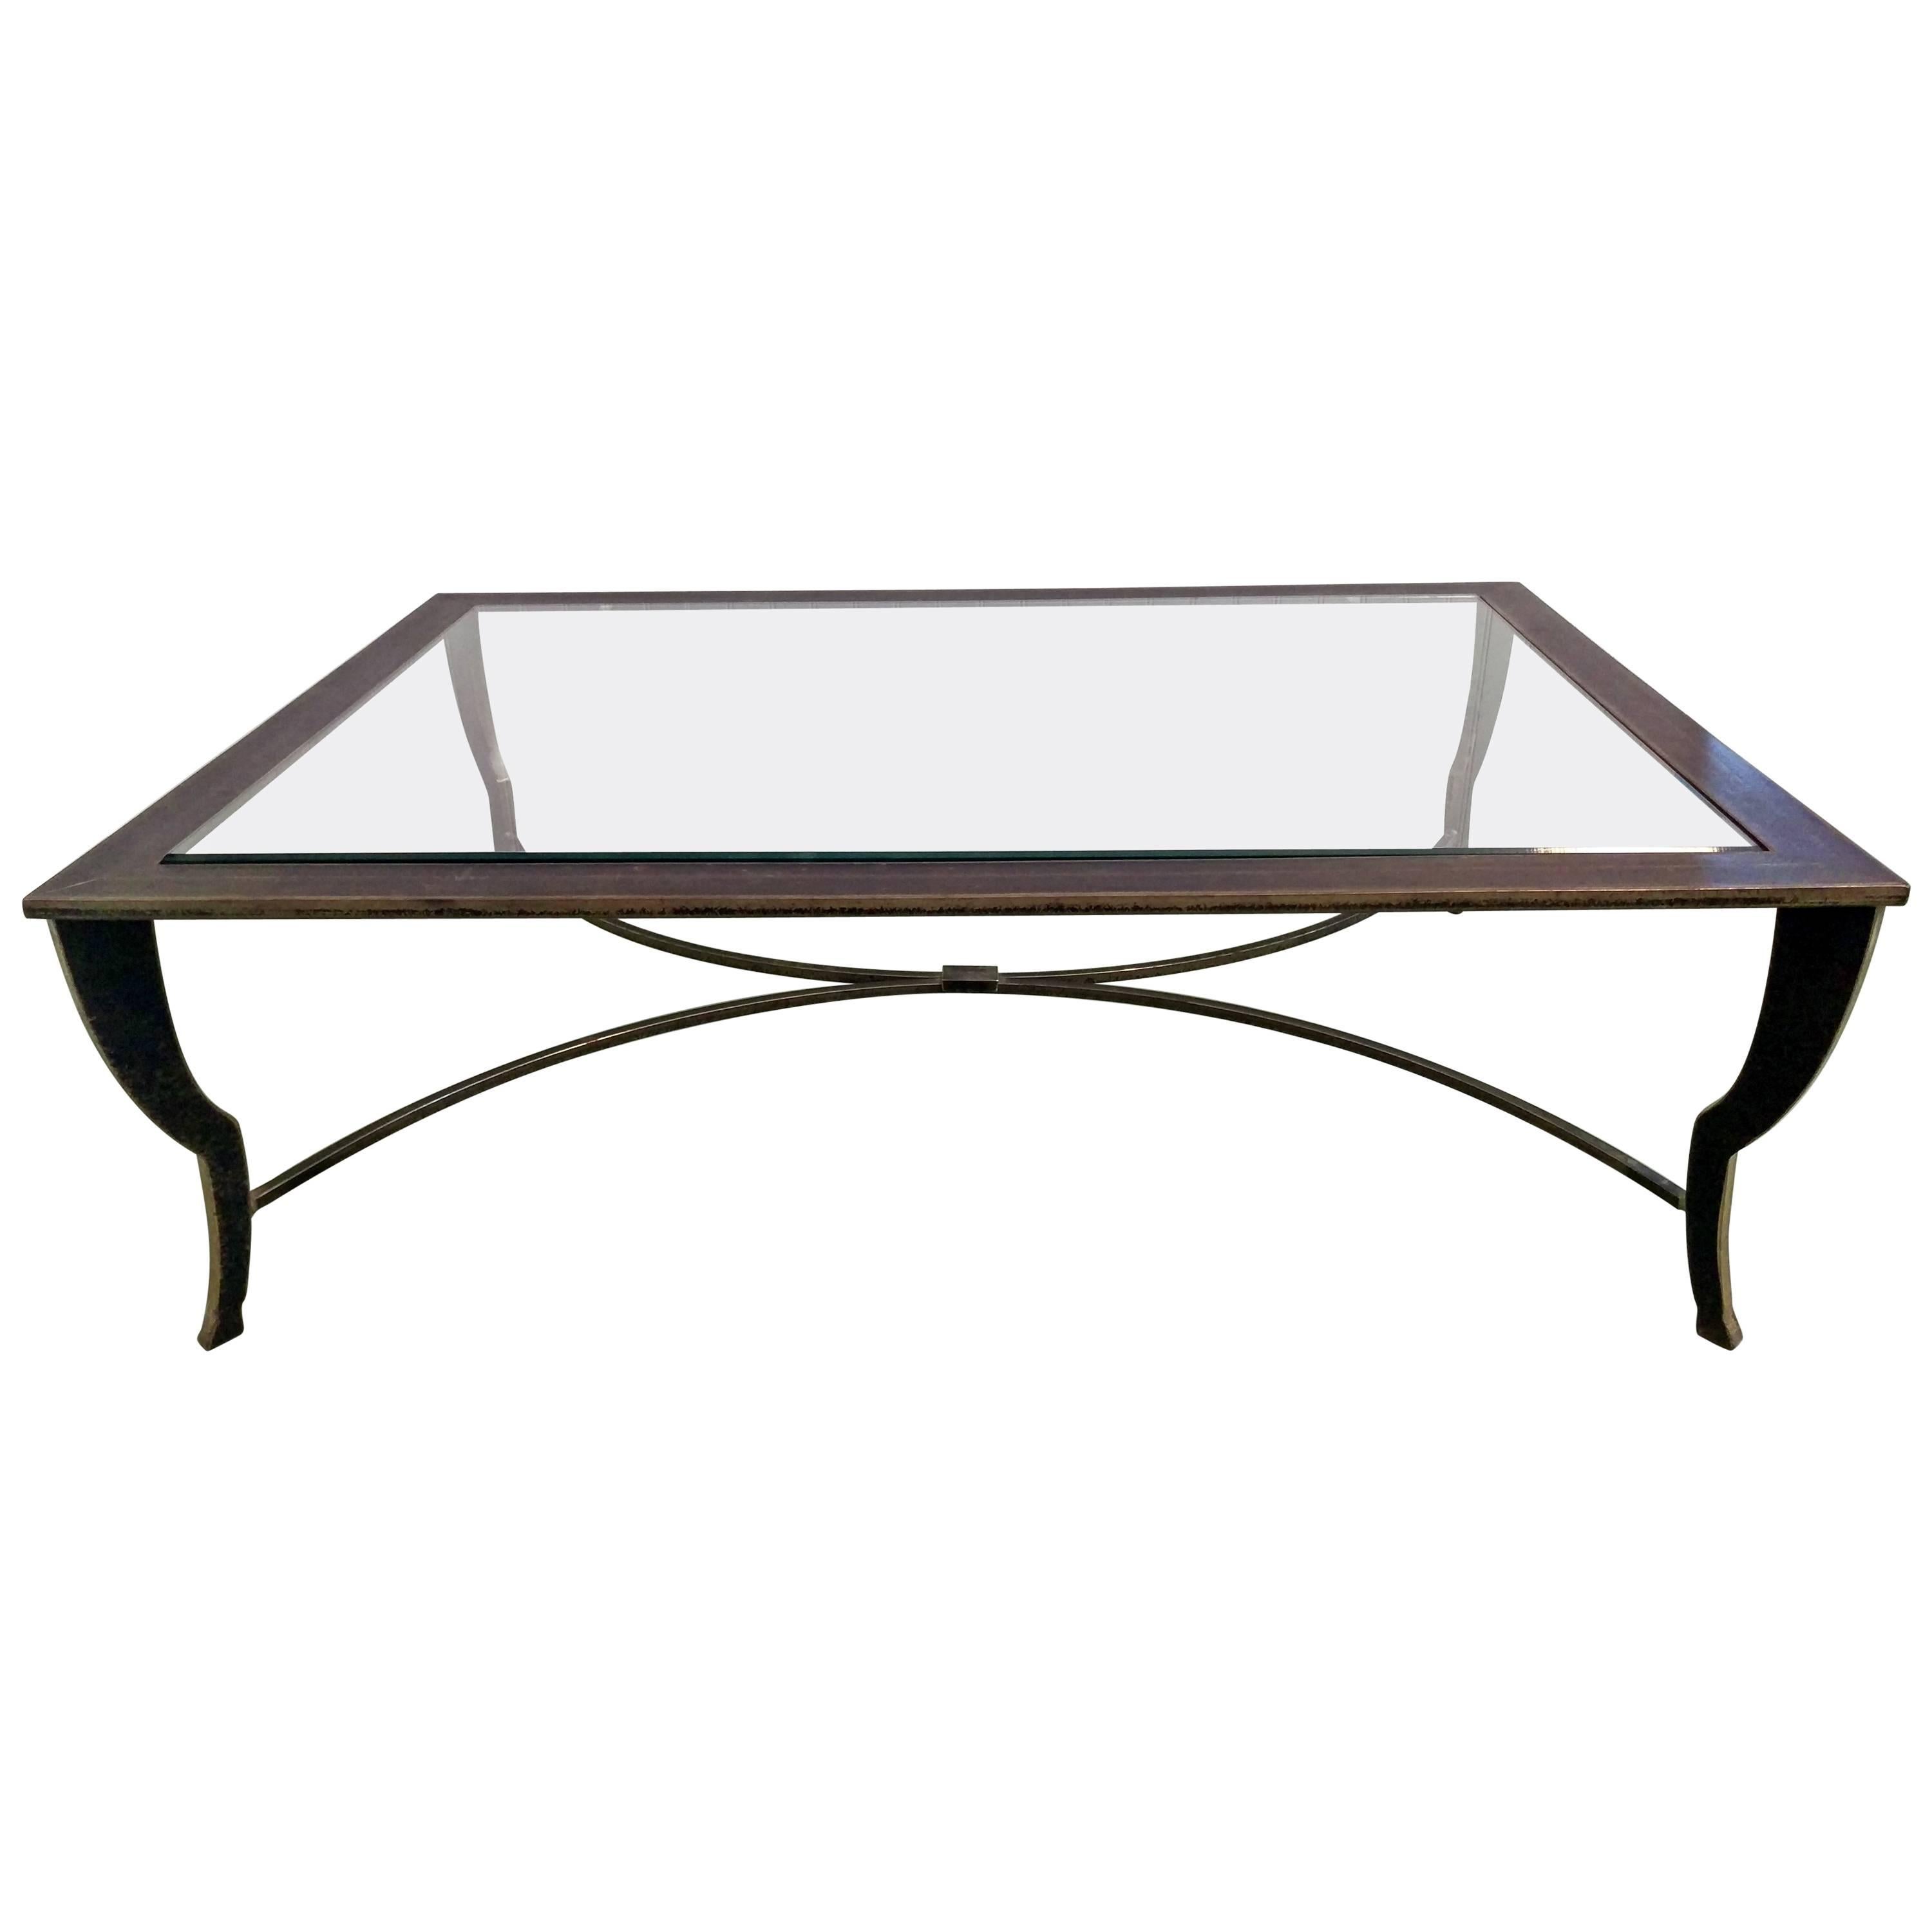 Maison Ramsay Gilded Wrought Iron Coffee Table, offered by La Porte For Sale